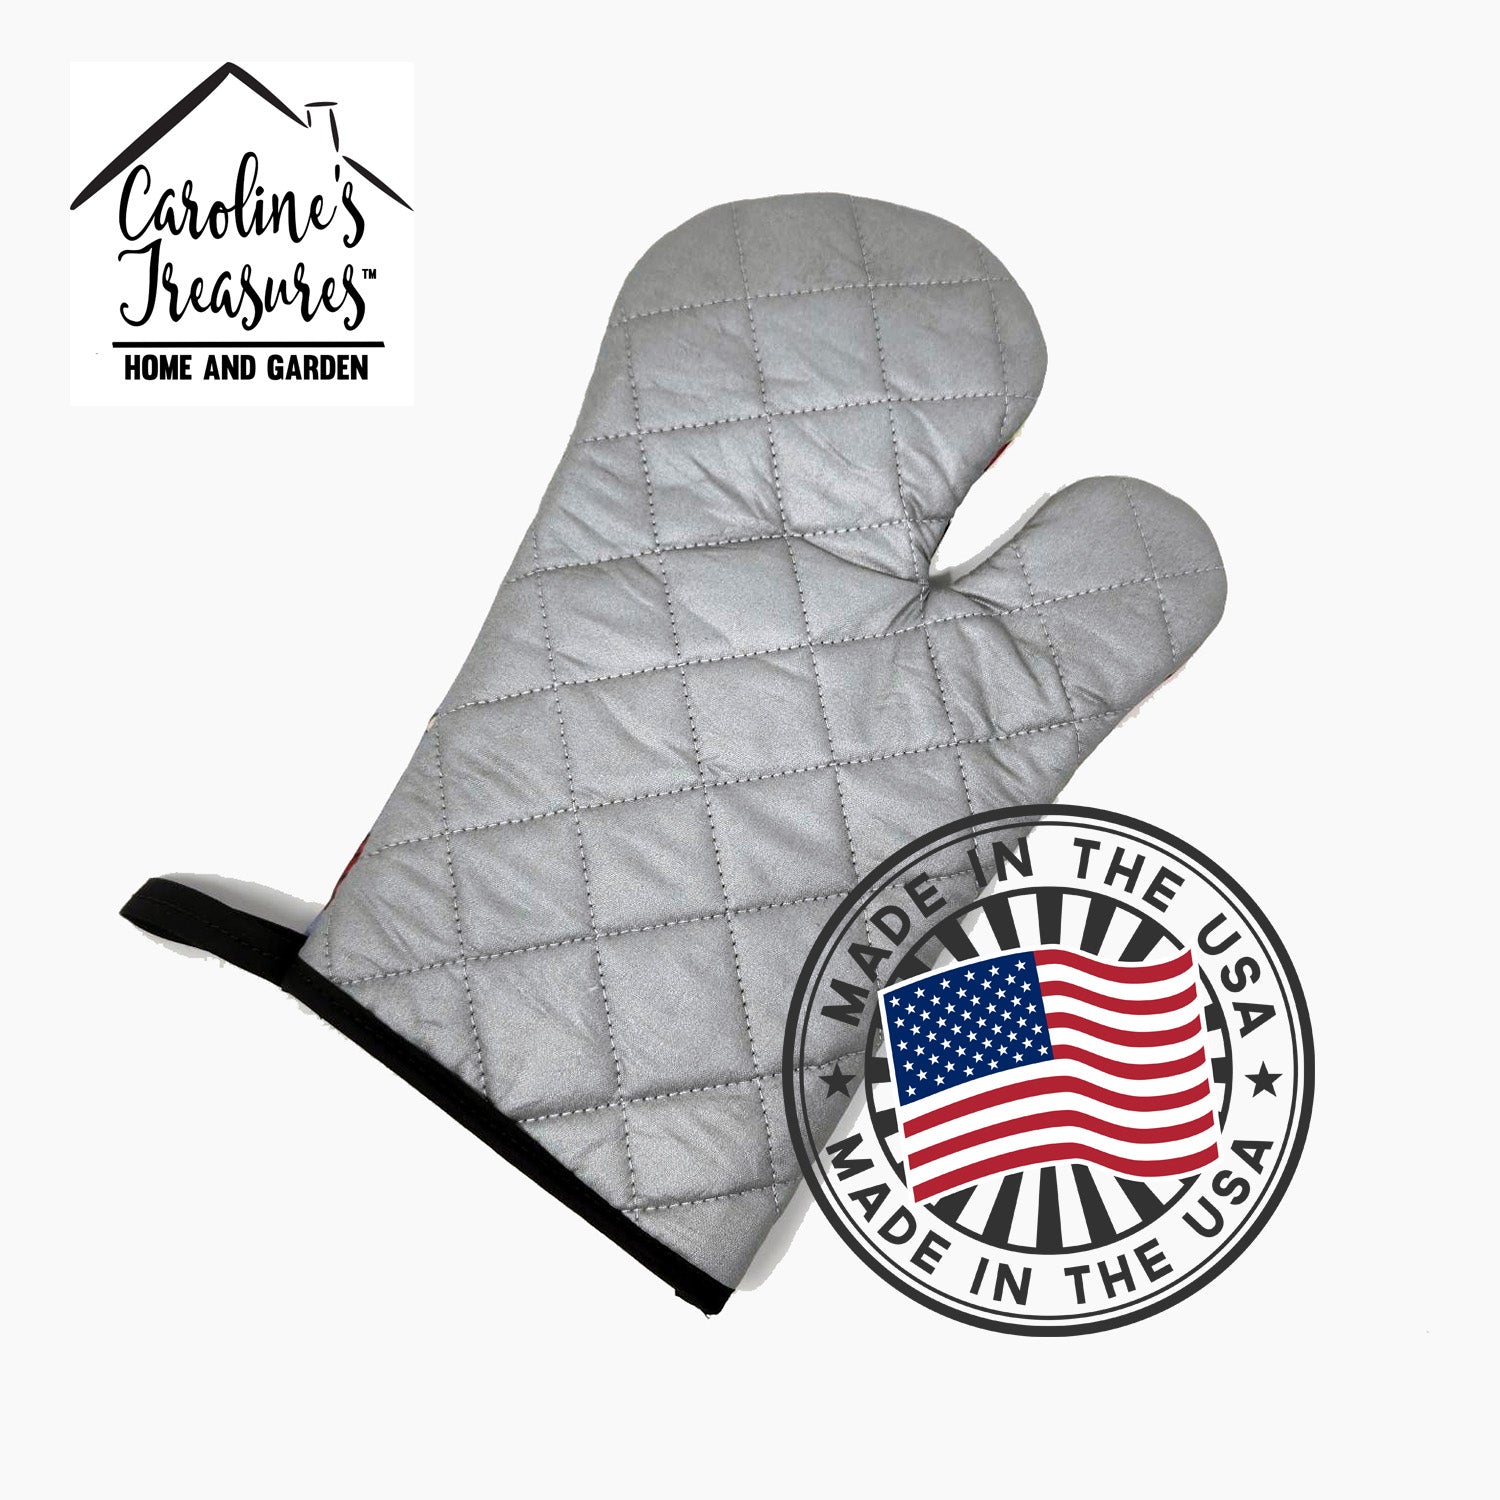 Lots of White Standard Poodle Oven Mitt